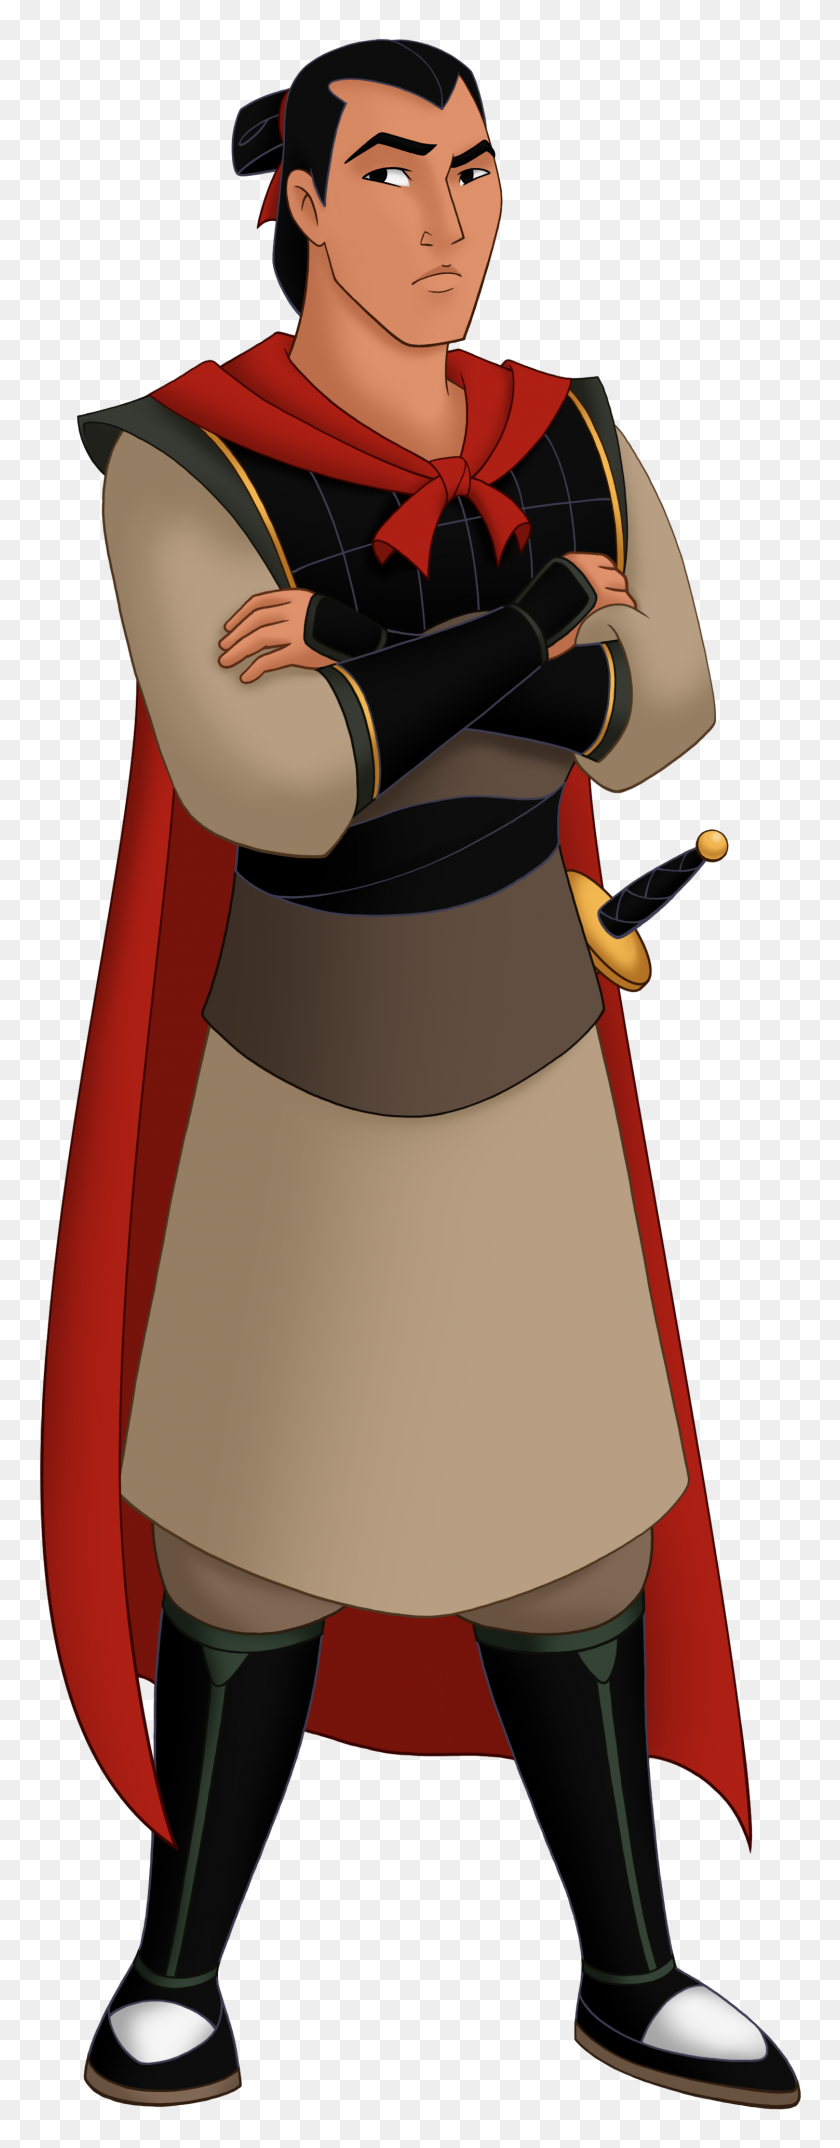 1502x4022 The Top Disney Characters To Compete In The Hunger Games - Mulan PNG